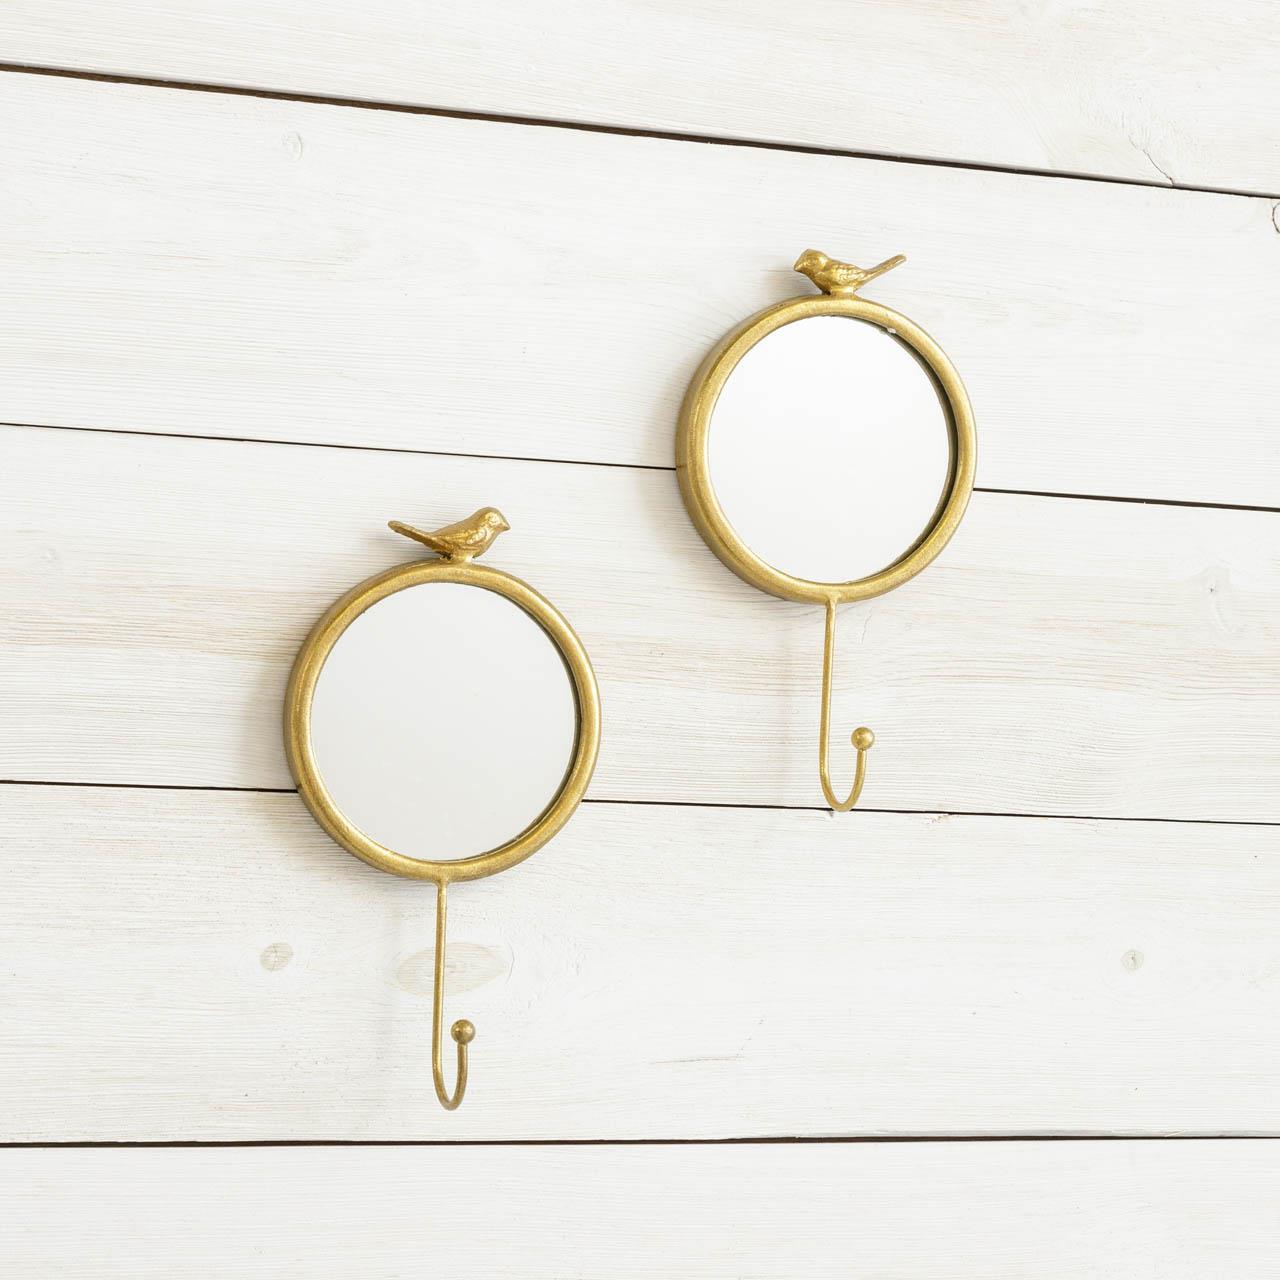 Gold Bird Mirrors with Hook